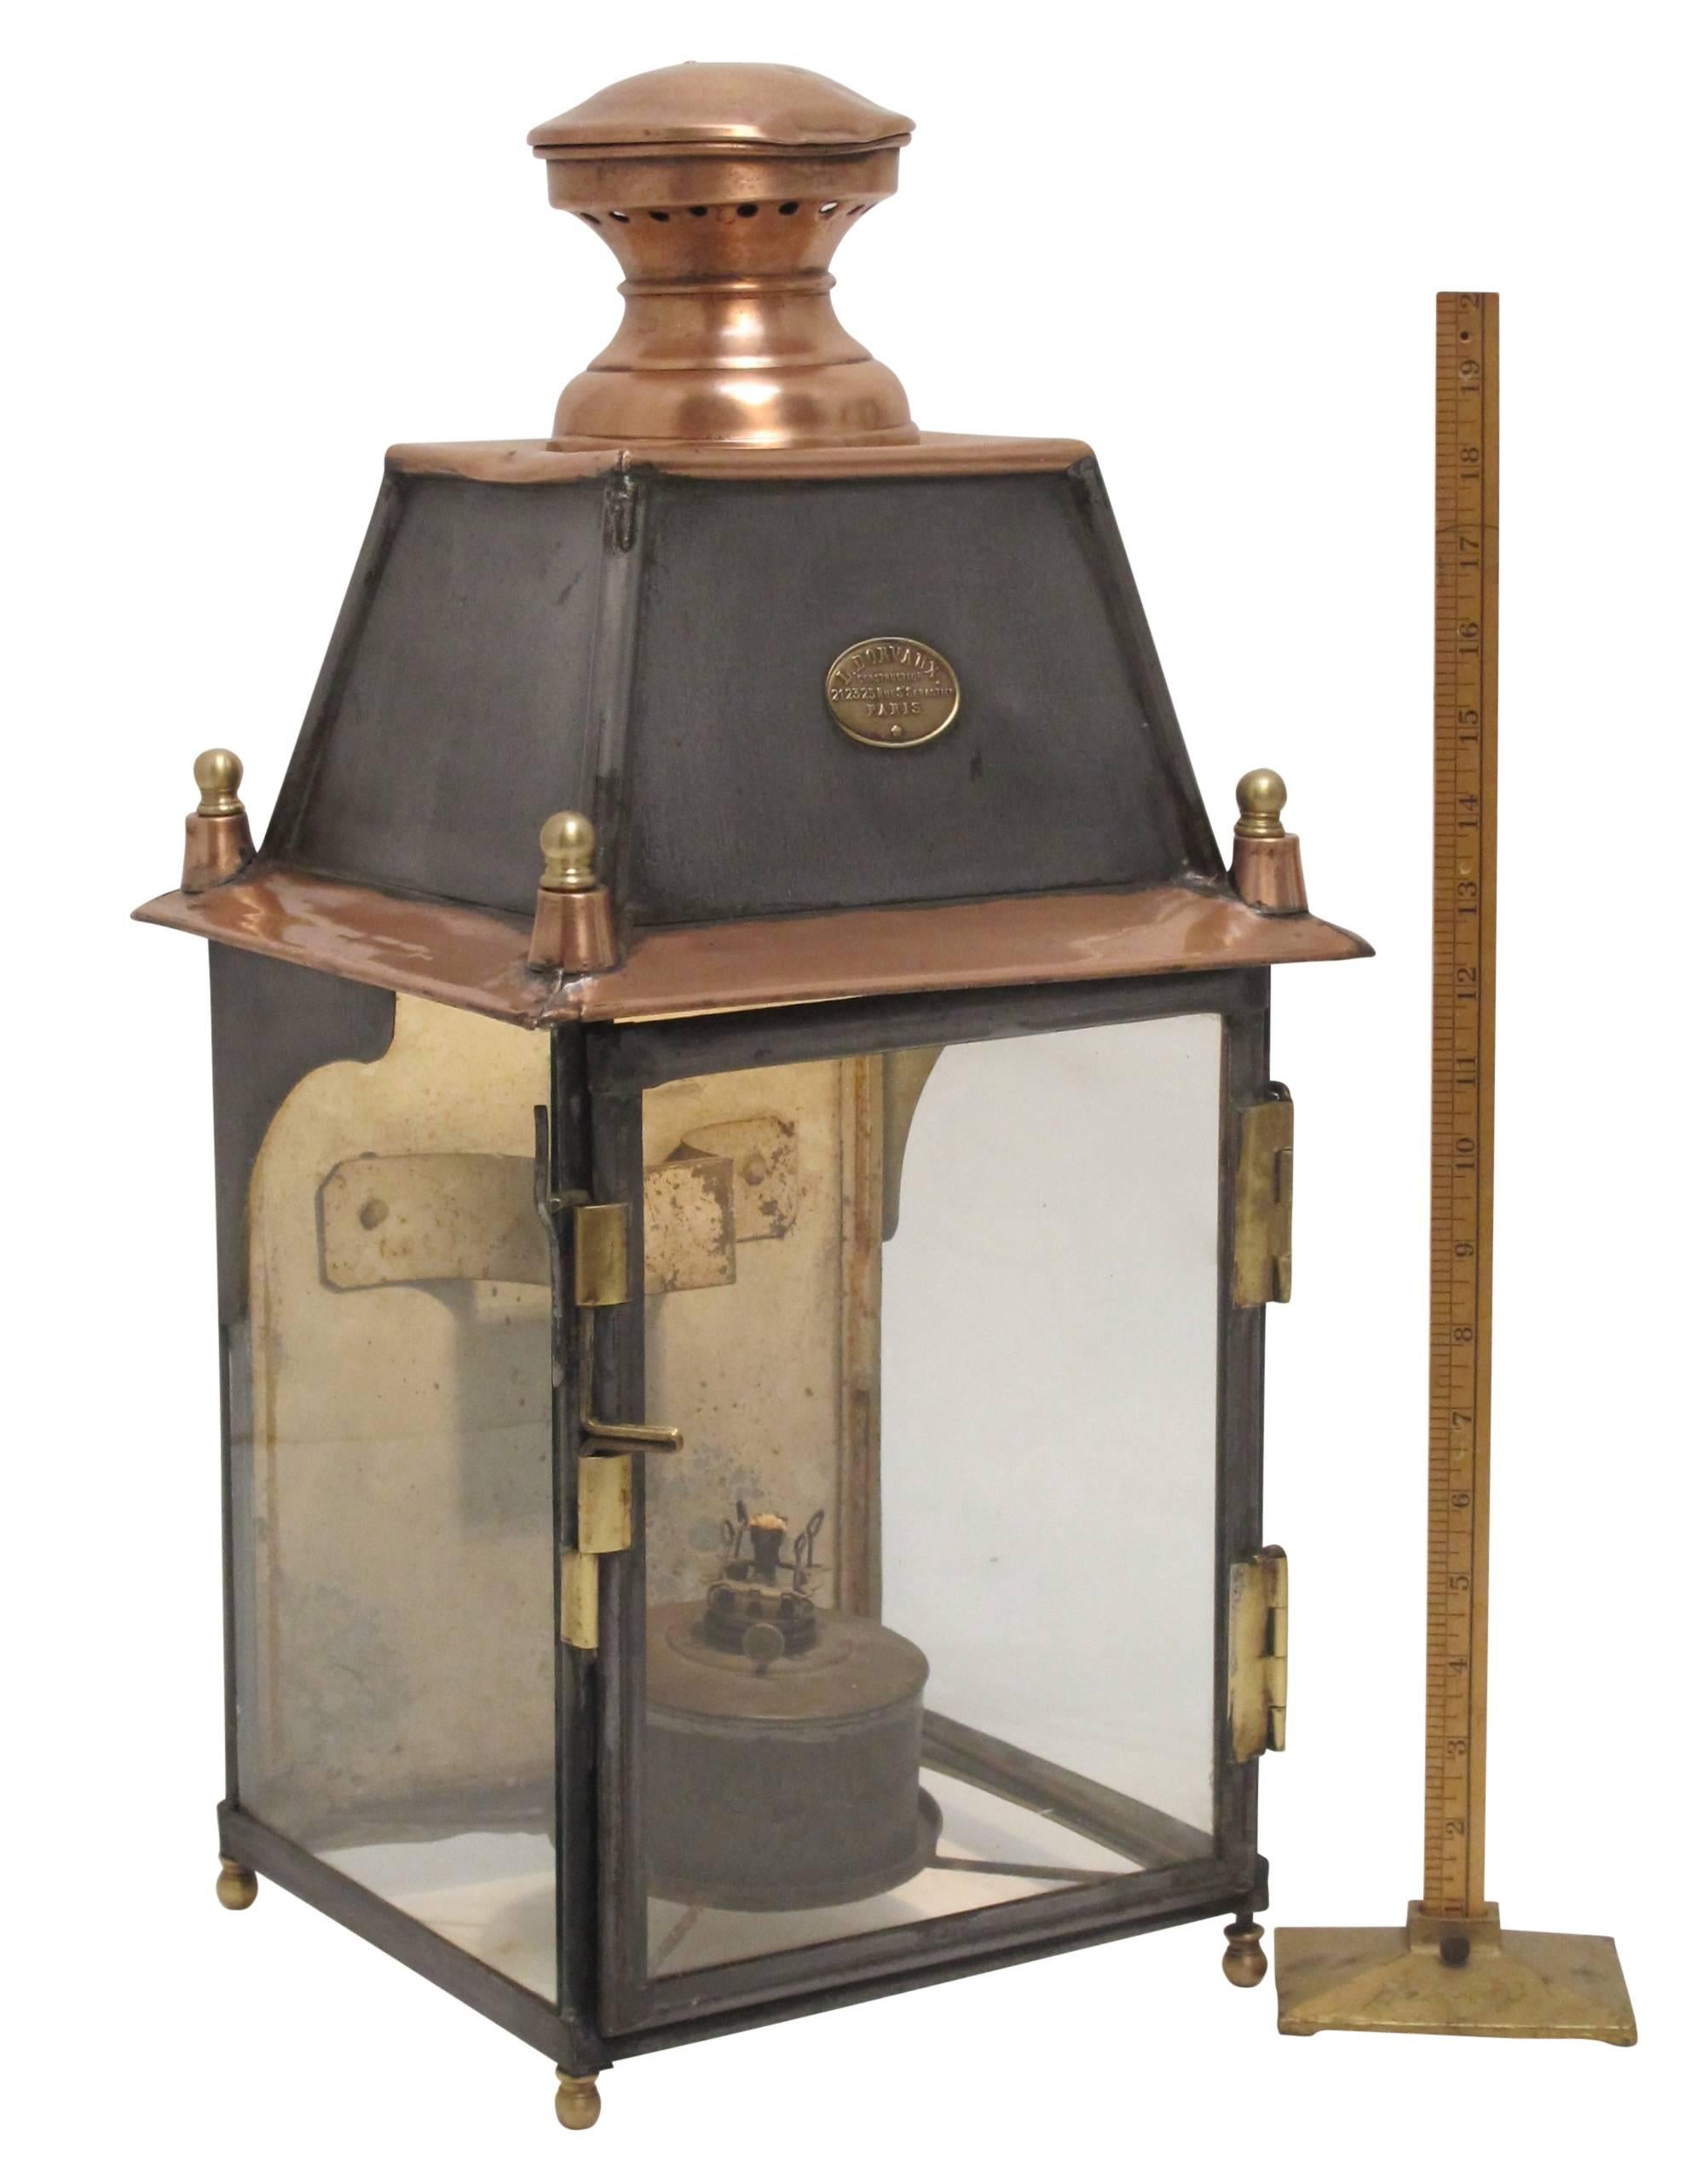 Large tin kerosene lantern, with copper chimney and brass detail, bearing the original oval label for L. Dorvaux Paris. Recently wired and used as a table lamp, but we will wire for exterior use if desired. France, late 19th century.